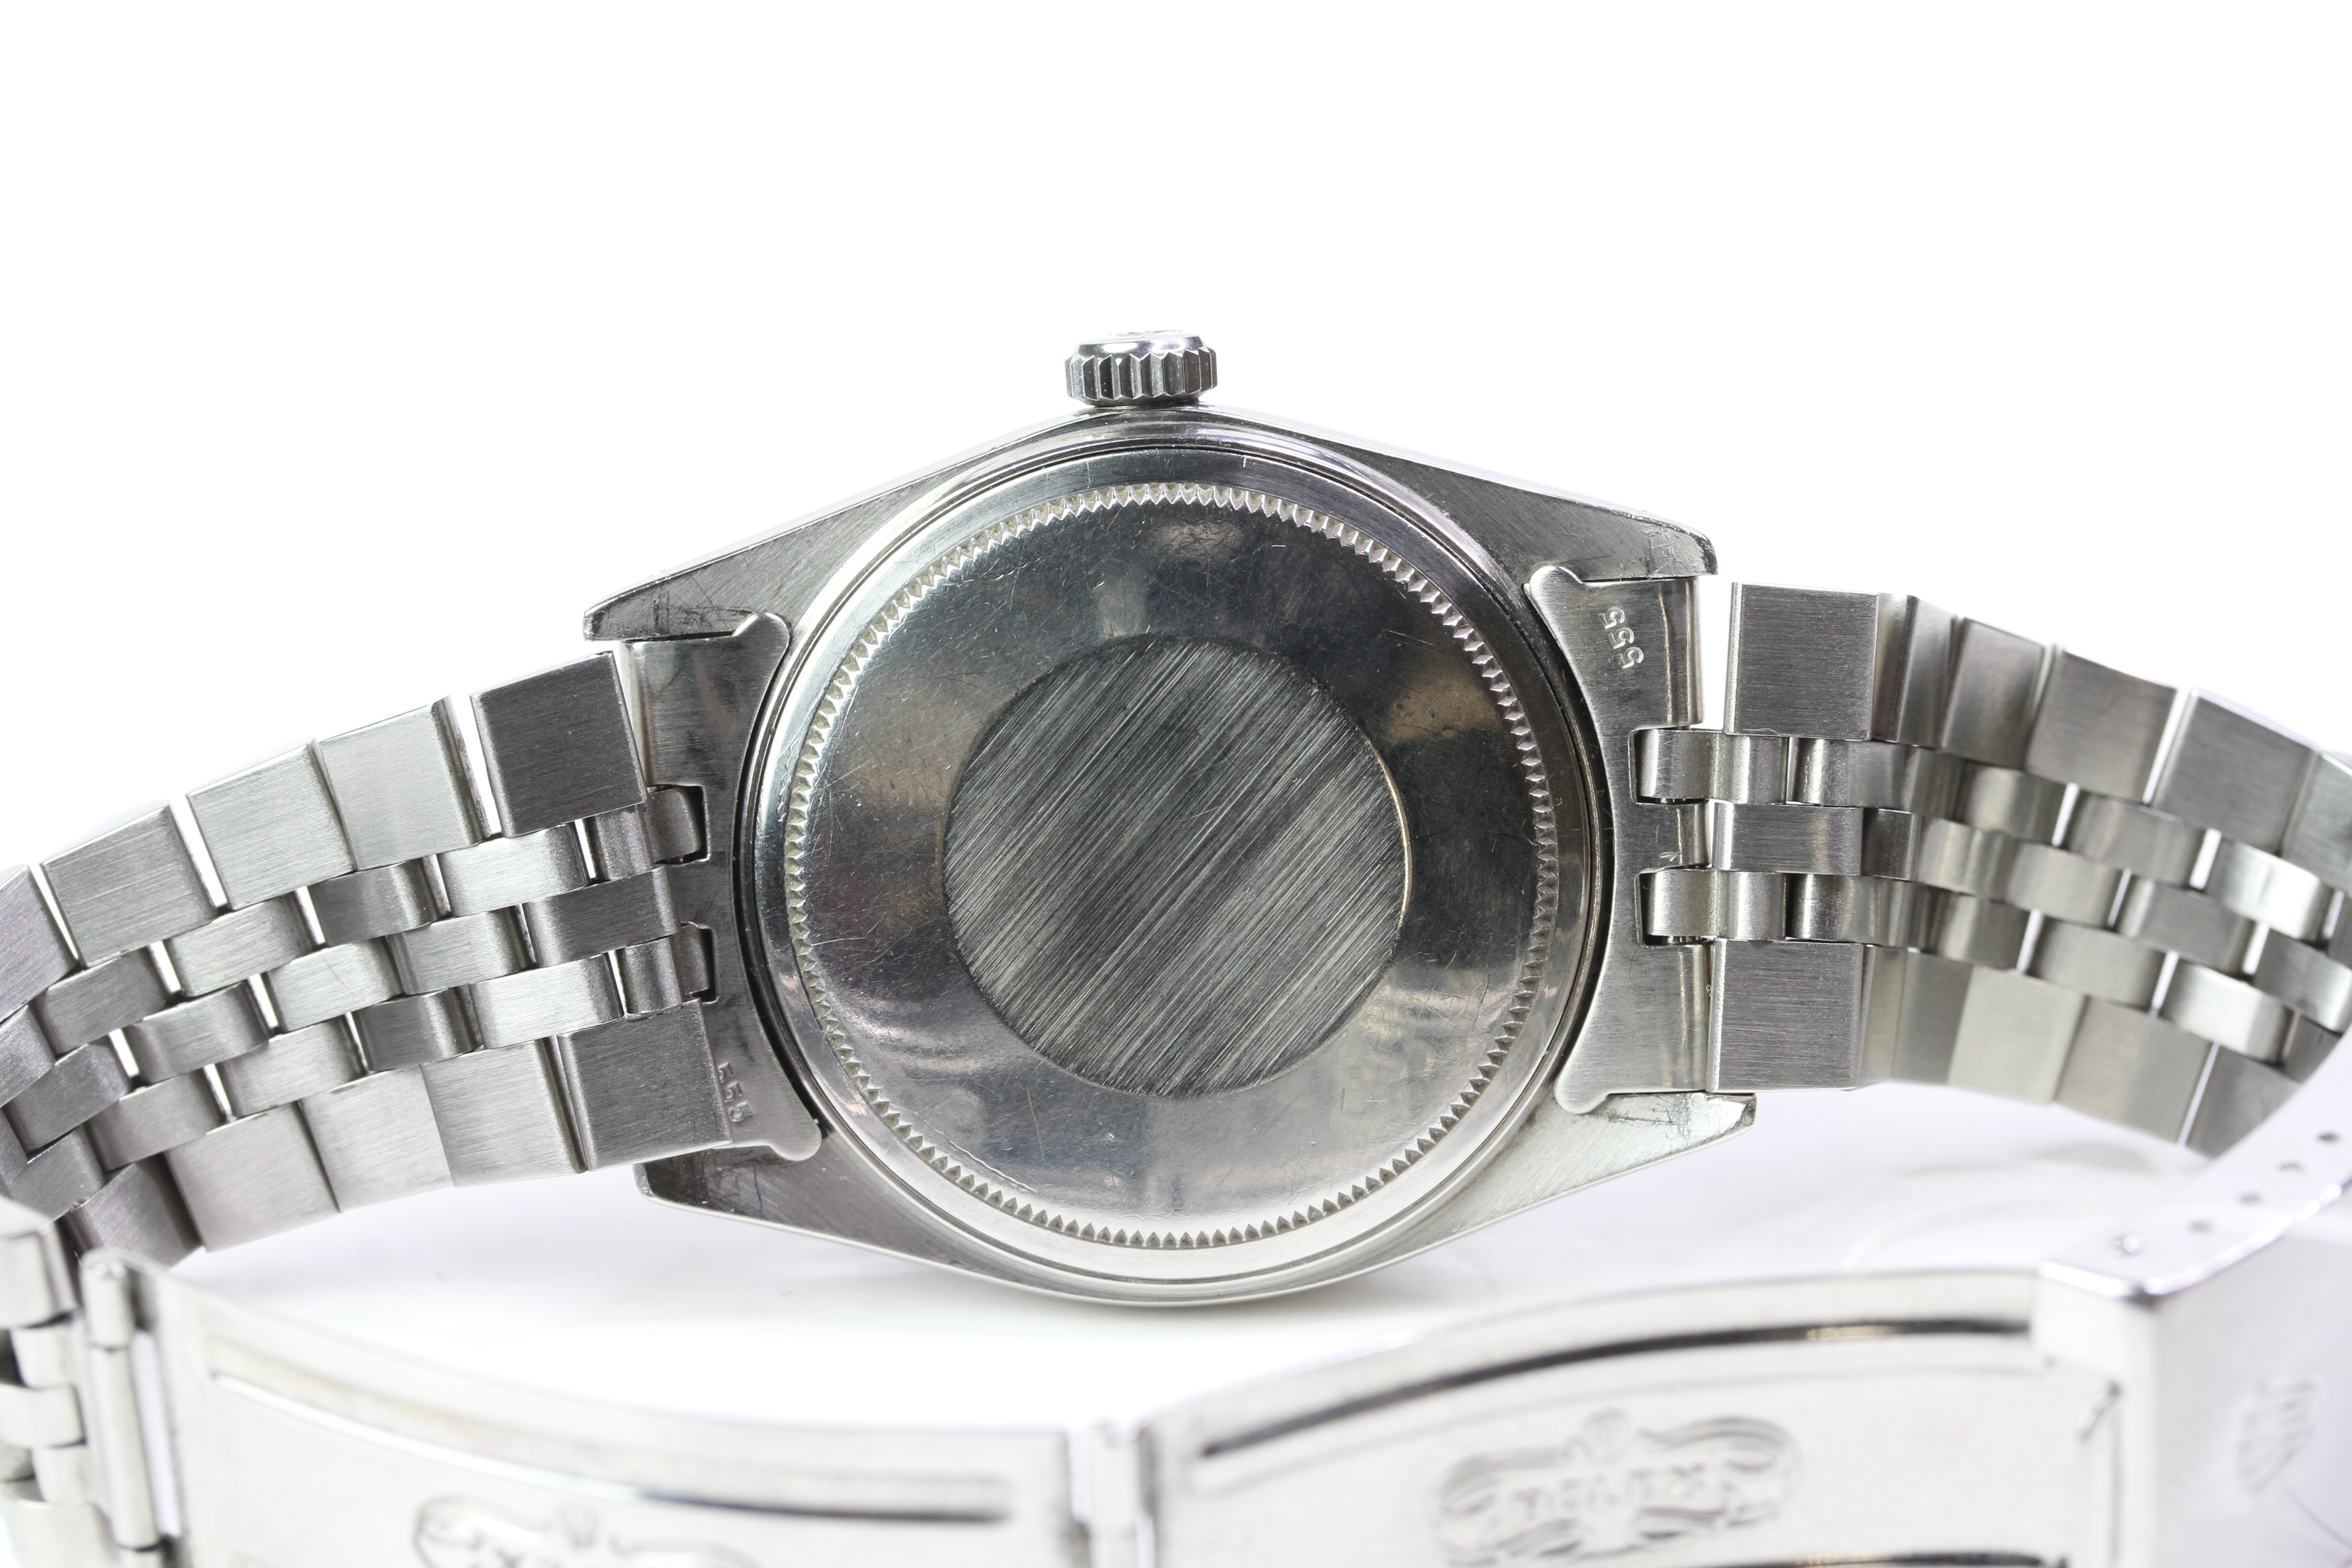 ROLEX OYSTER PERPETUAL DATEJUST REFERENCE 16014 CIRCA 1984, silver dial with baton hour markers, - Image 3 of 5